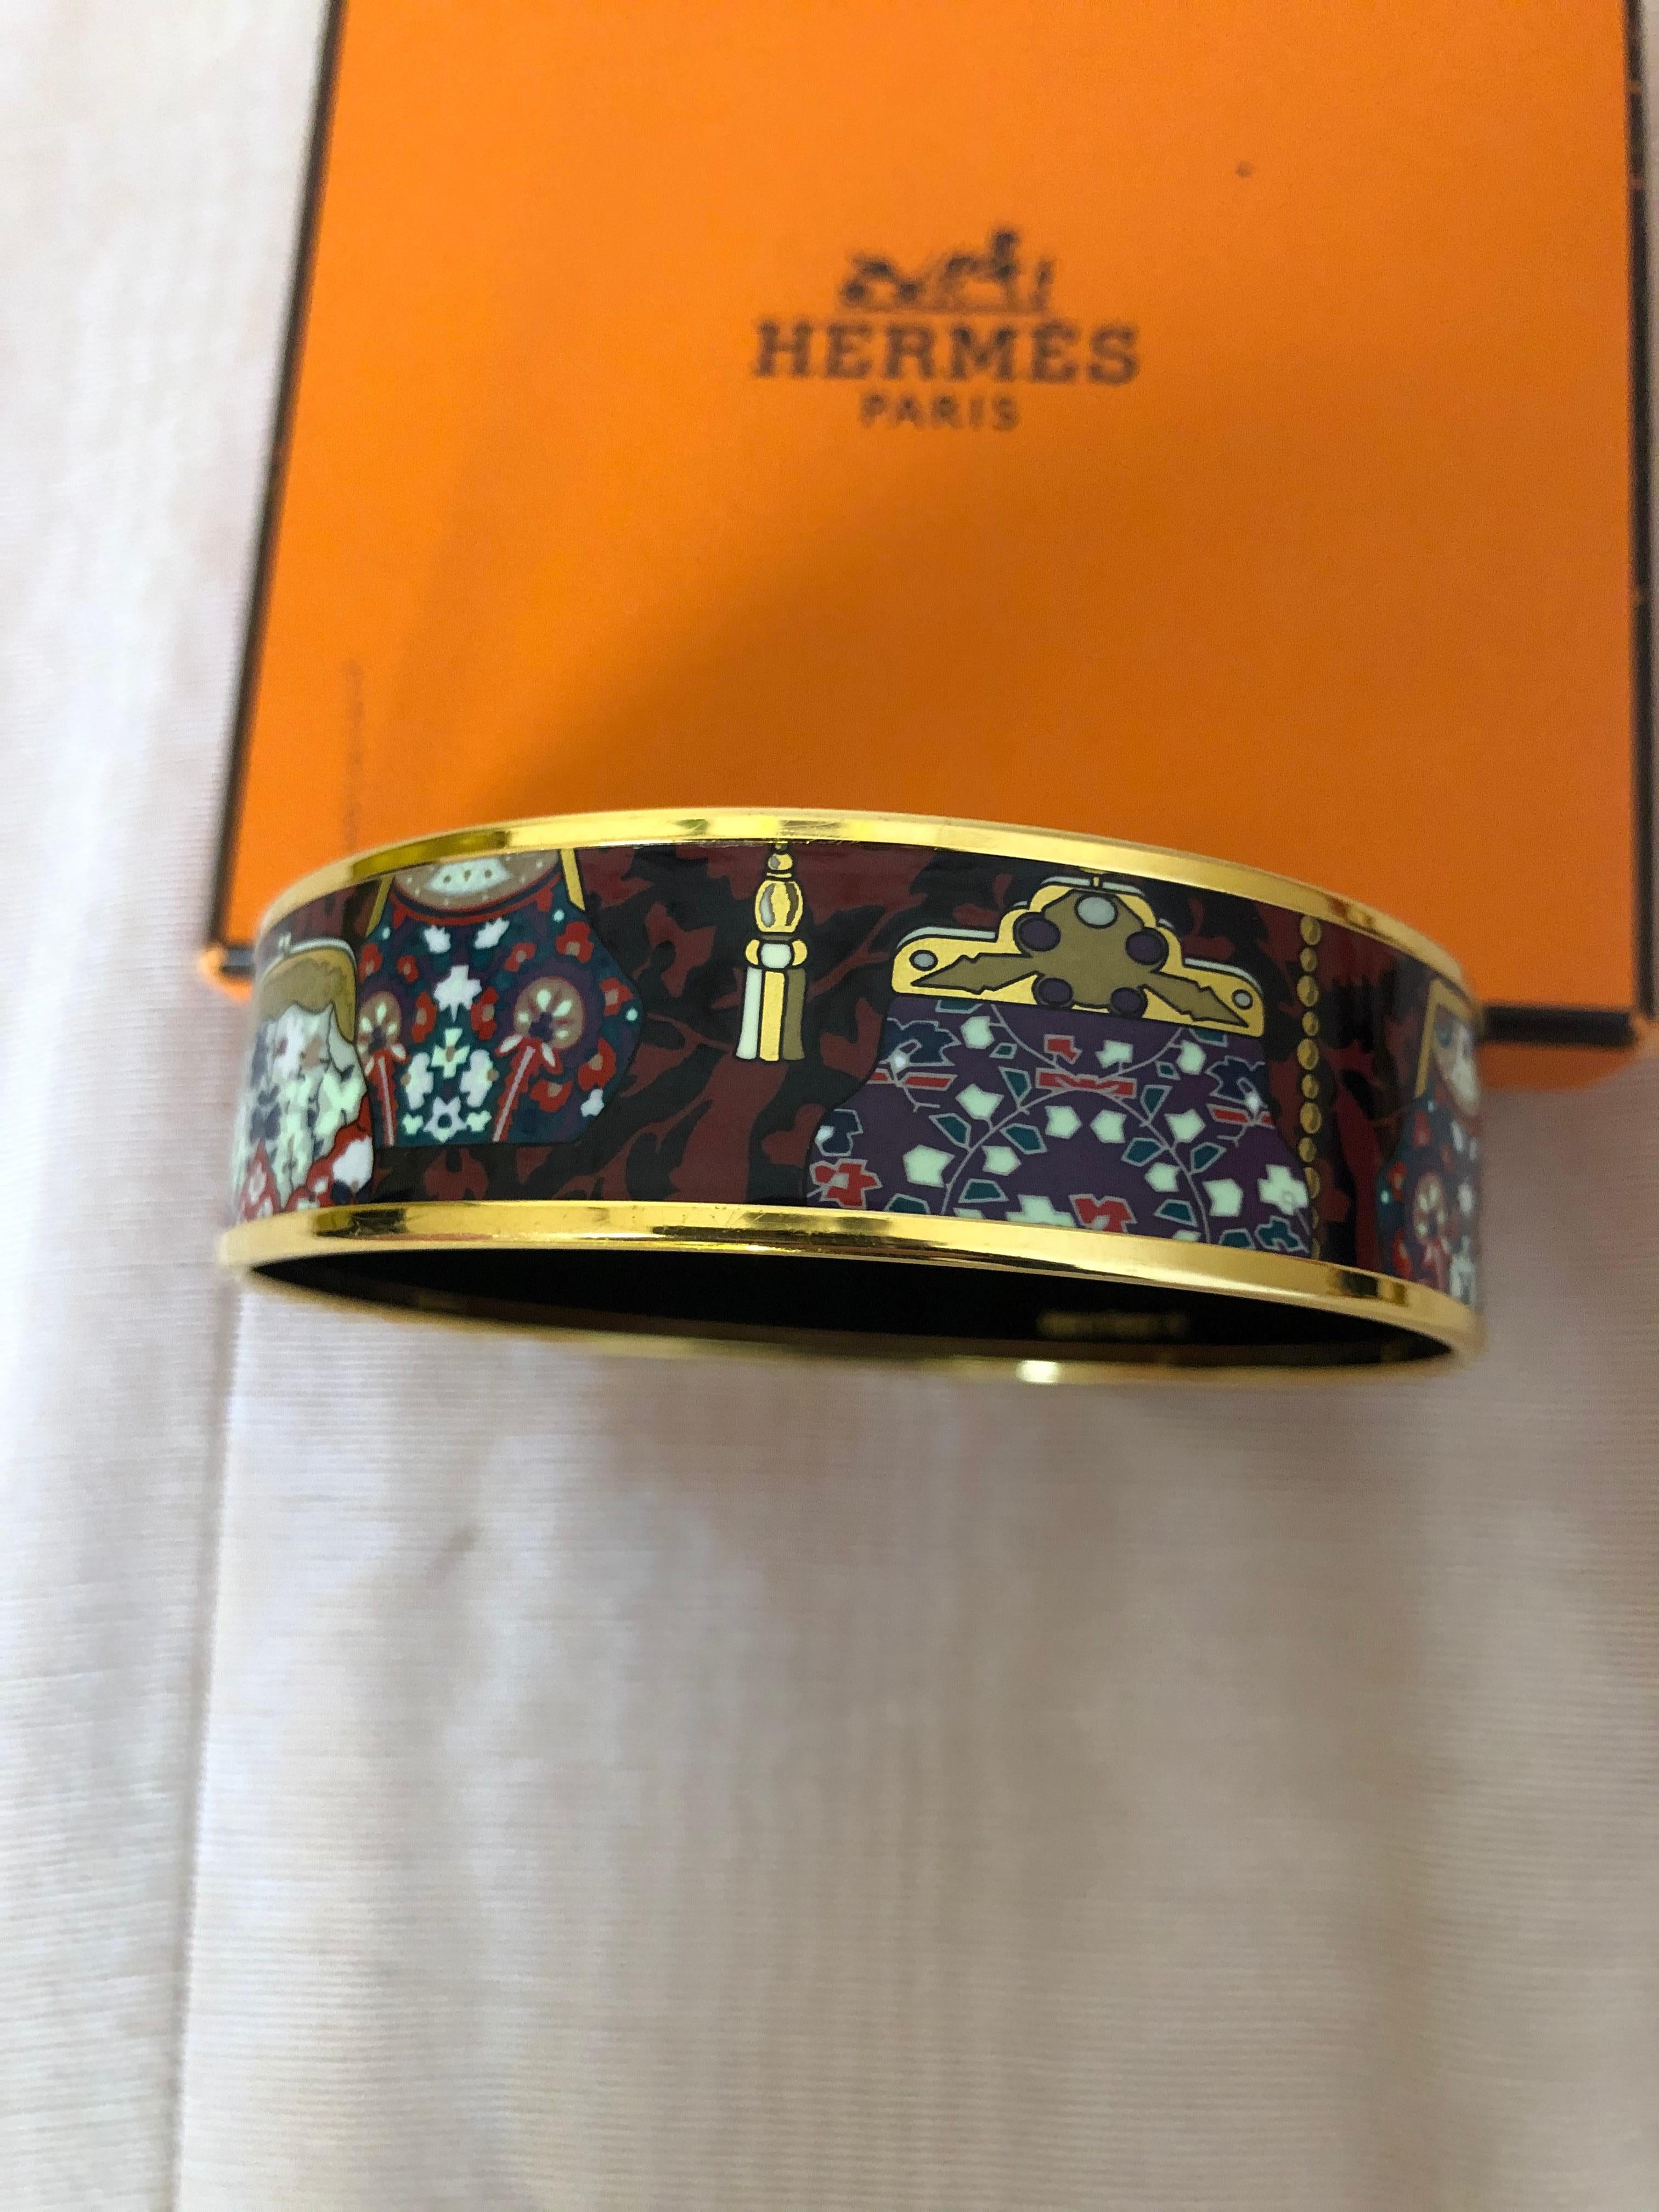 This Hermes Cachmire de Tamara bangle is made of enamel and gold plated rims and is well marked. The beautiful graphics are of vintage evening bags and florals. The bangle is size GM 70 8 M-L, is in excellent condition, and comes with a dustbag and